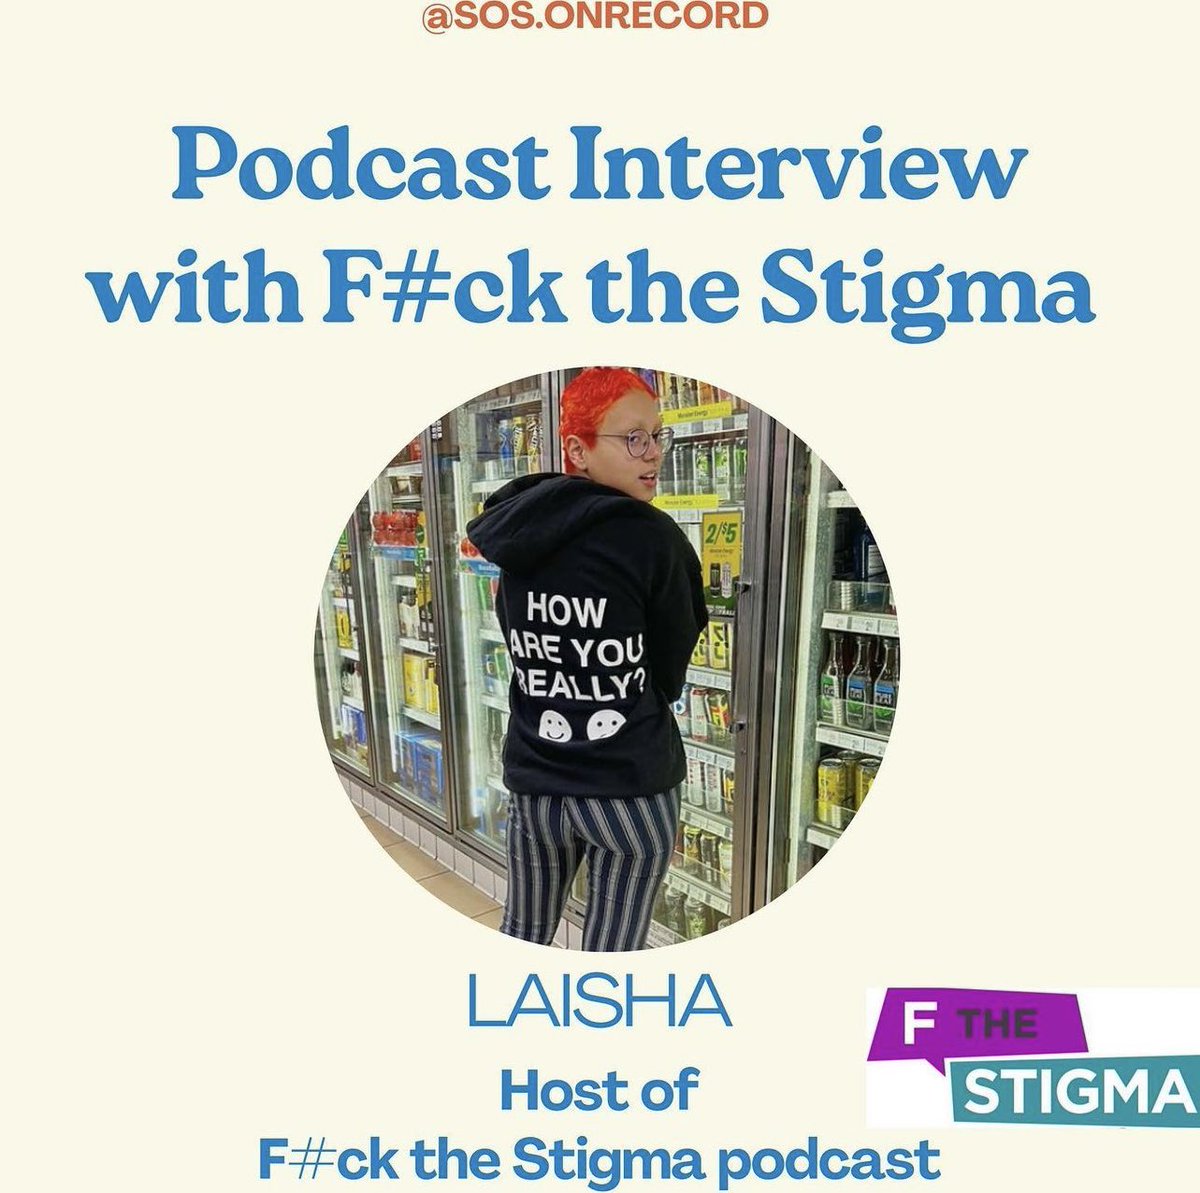 PODCAST EPISODE WITH GENERATION S.O.S ON RECORD! THIS FRIDAY! They took the time to interview Laisha, host of the F the Stigma podcast. Be ready for the release later this week…
@generationsosus 
#fthestigma #fuckthestigma 
#fts #sharingourstories